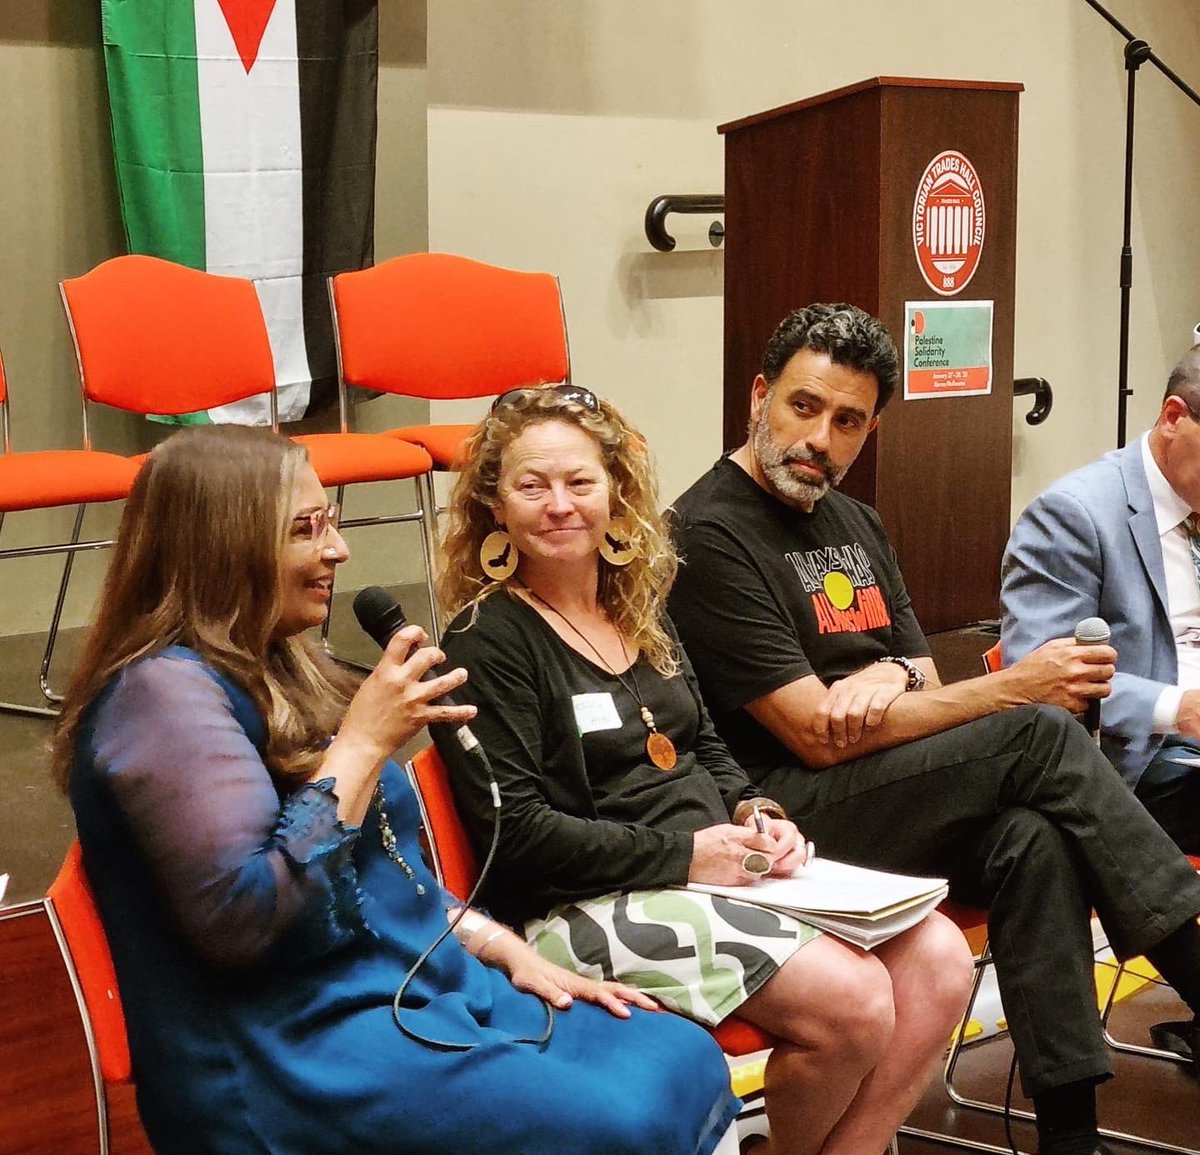 Mehreen Faruqi: I’m honoured to have joined the inaugural Palestine Solidarity Co…